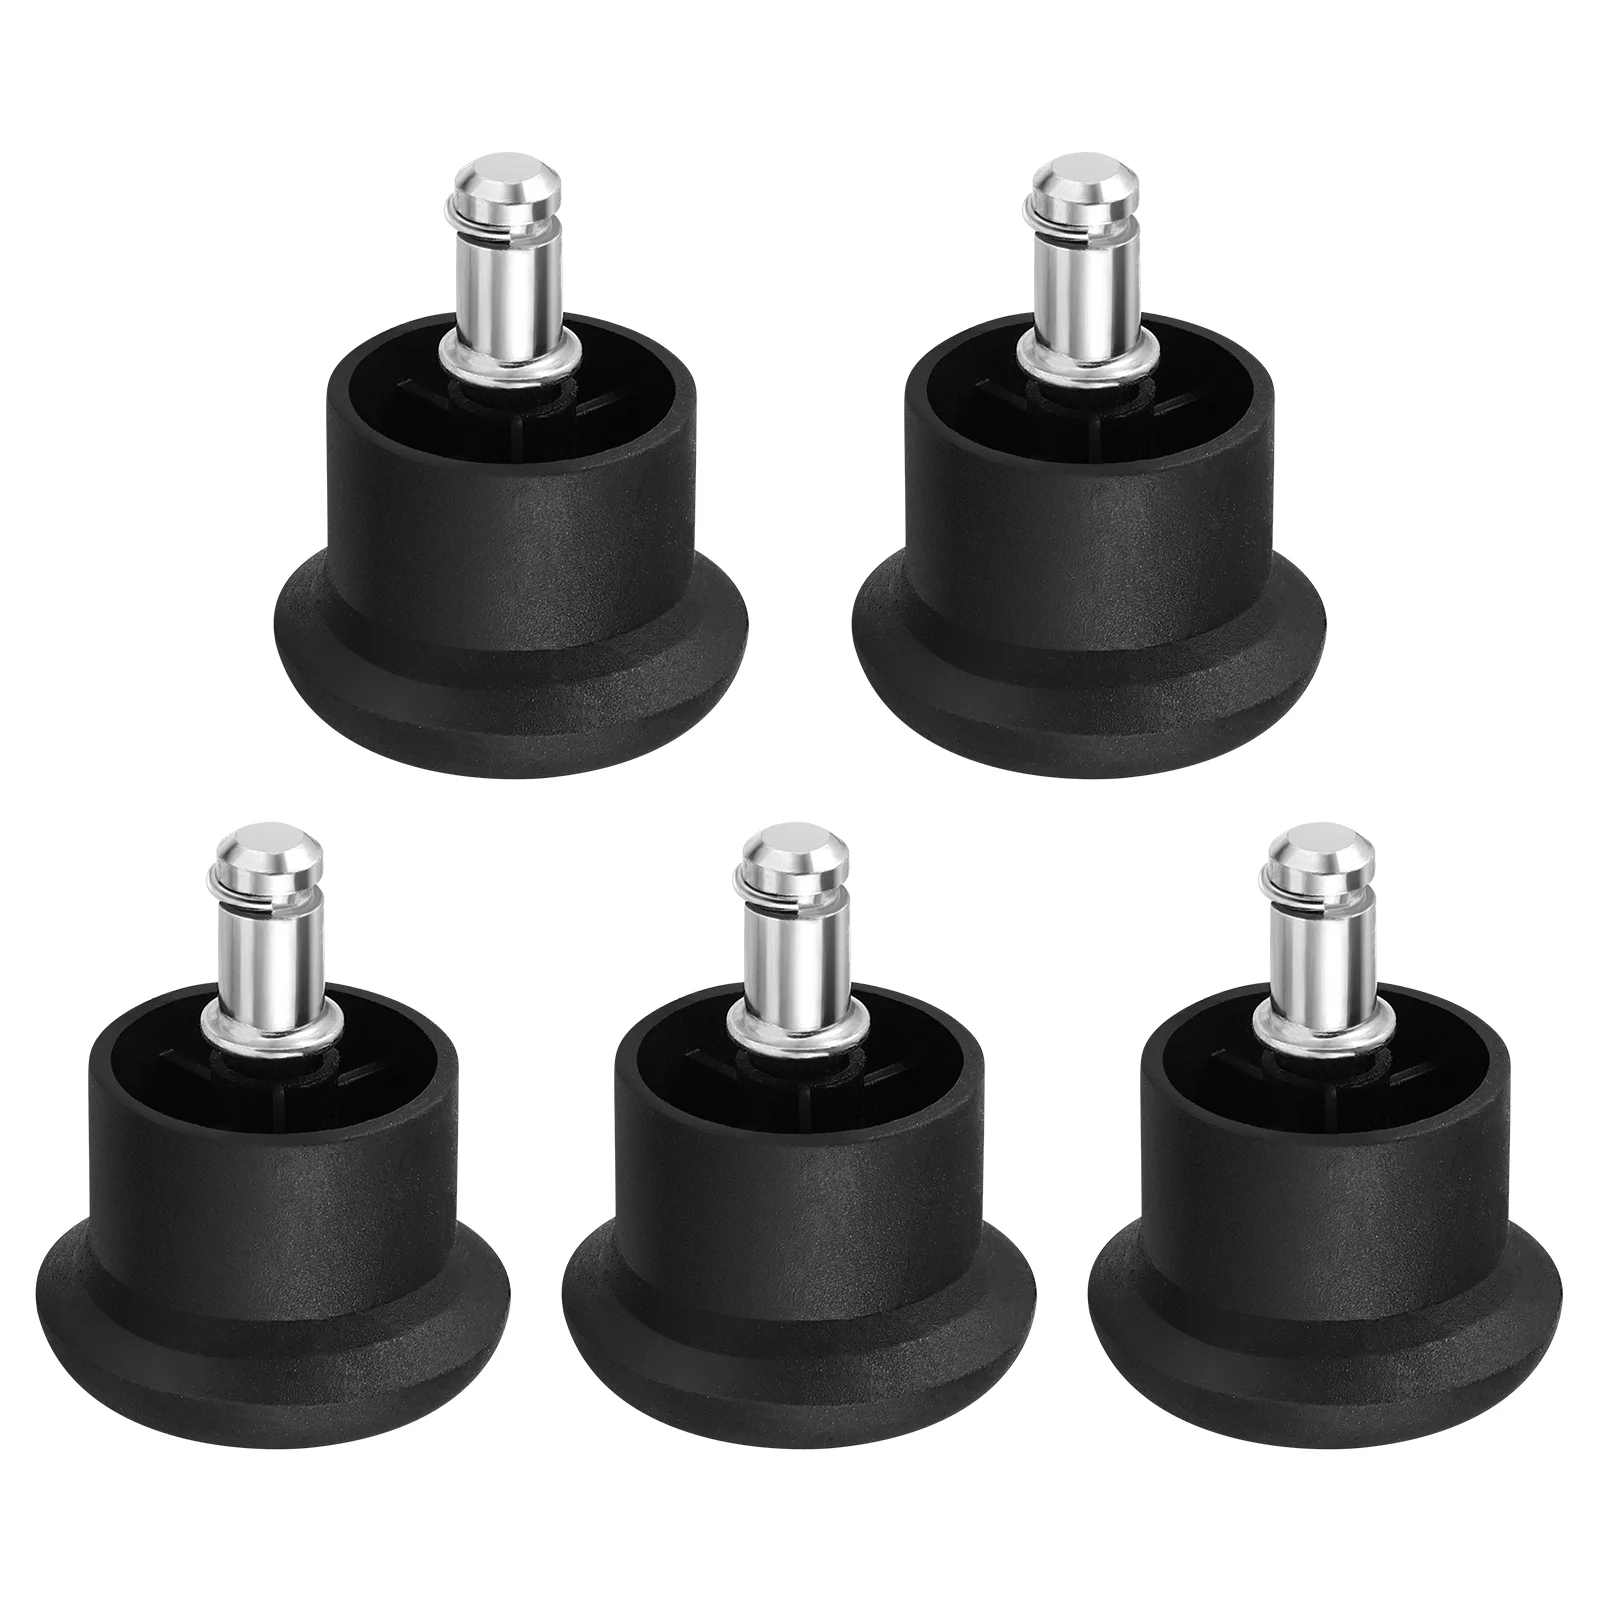 

Chair Wheels Casters Office Stopper Caster Glides Fixed Chairs Carpetwheel Castors Accessories Foot Desk Stationary Heavy Duty